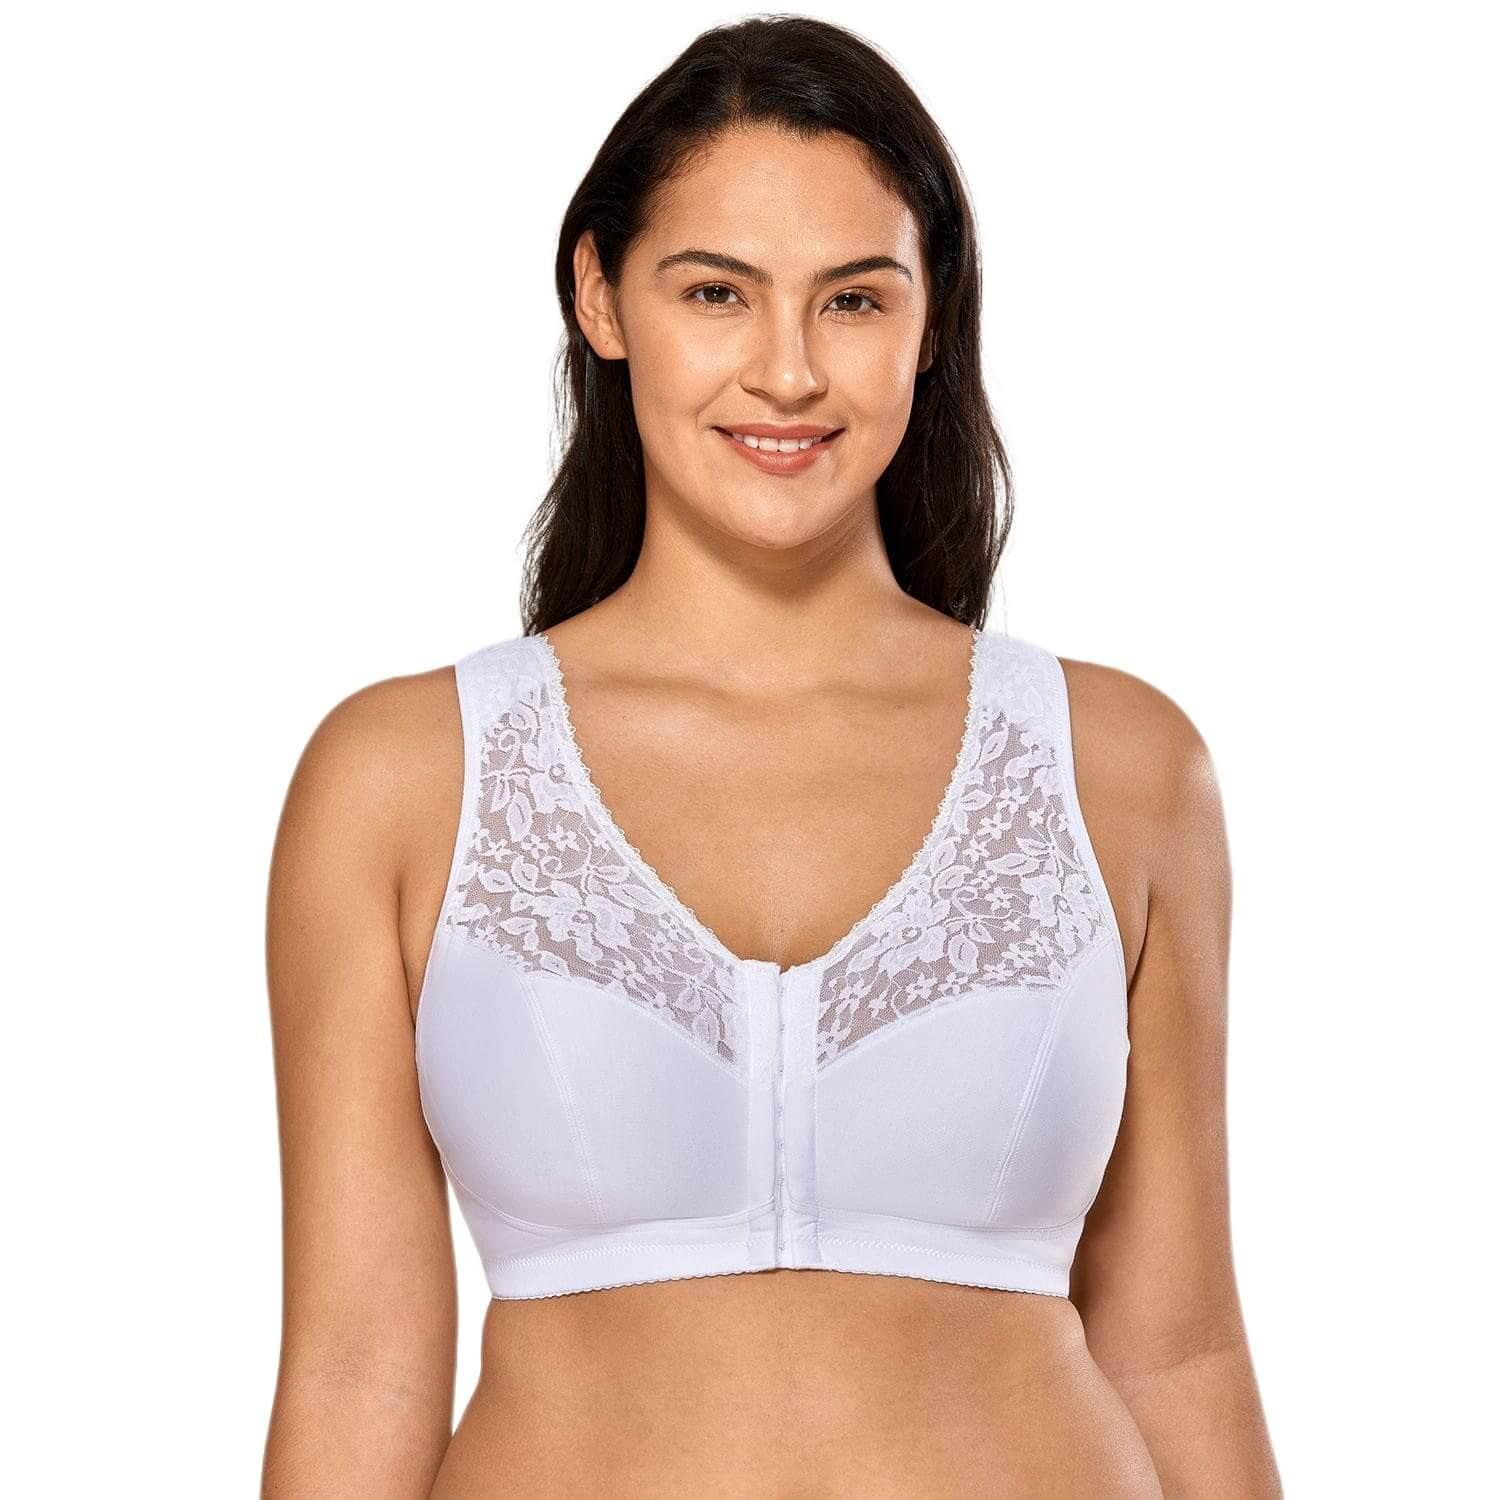 UP TO 15% OFF! Women's Sheer Mesh Bra See Through Unlined Sexy Lace  Transparent Bras Non Padded, White, 36/80(C/D)